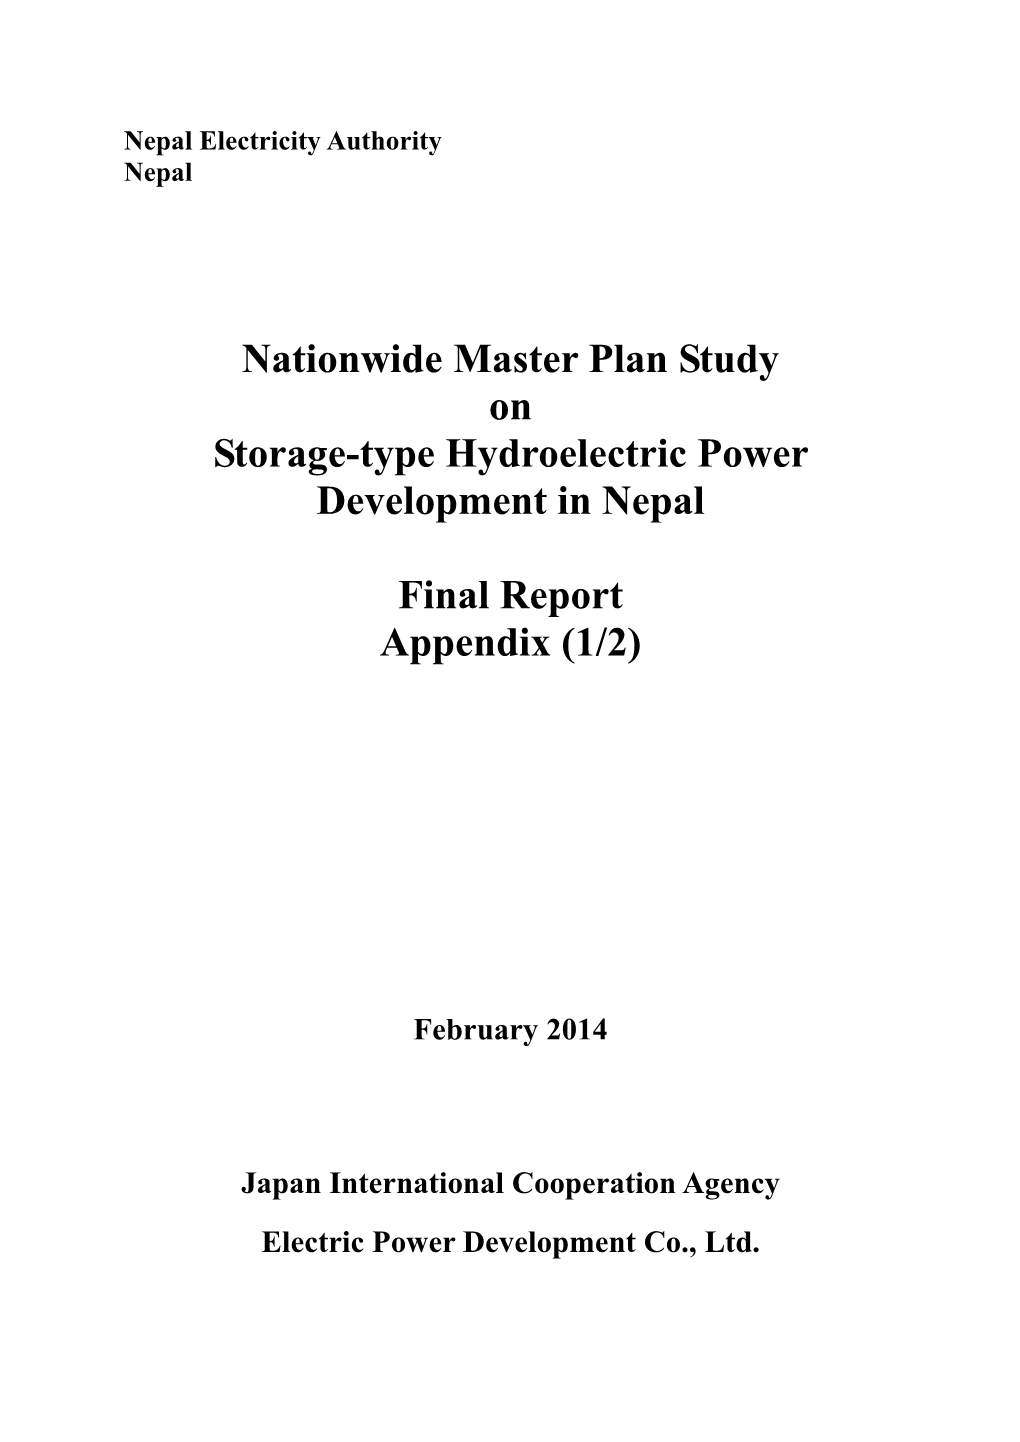 Nationwide Master Plan Study on Storage-Type Hydroelectric Power Development in Nepal Final Report Appendix (1/2)